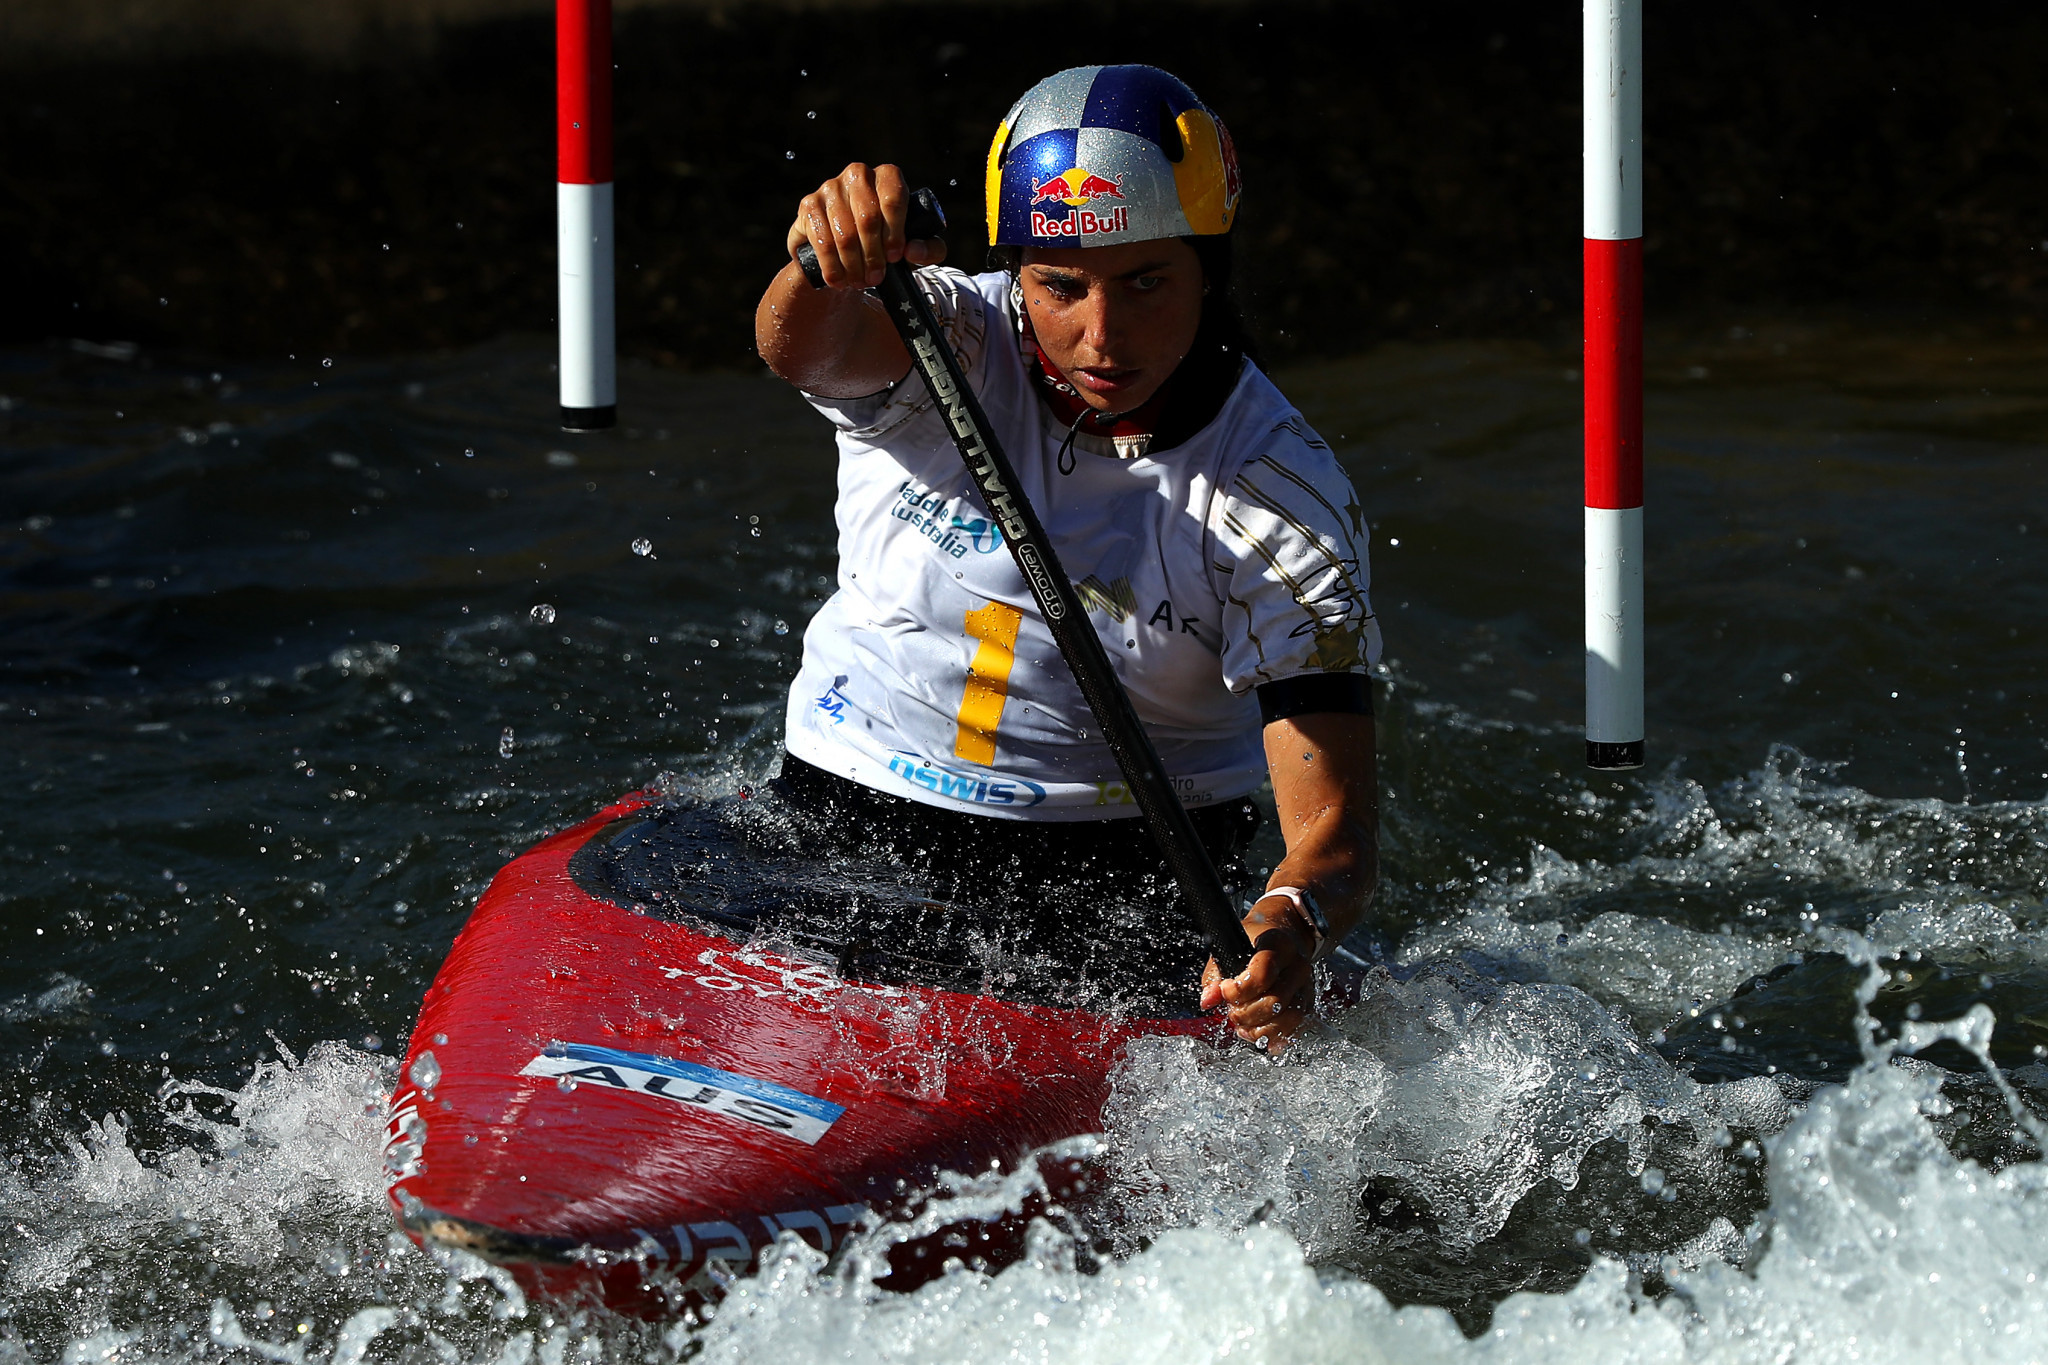 Australia's Jessica Fox will go for gold in the women's C1 event at the Oceania Canoe Slalom Championships in Sydney ©Getty Images